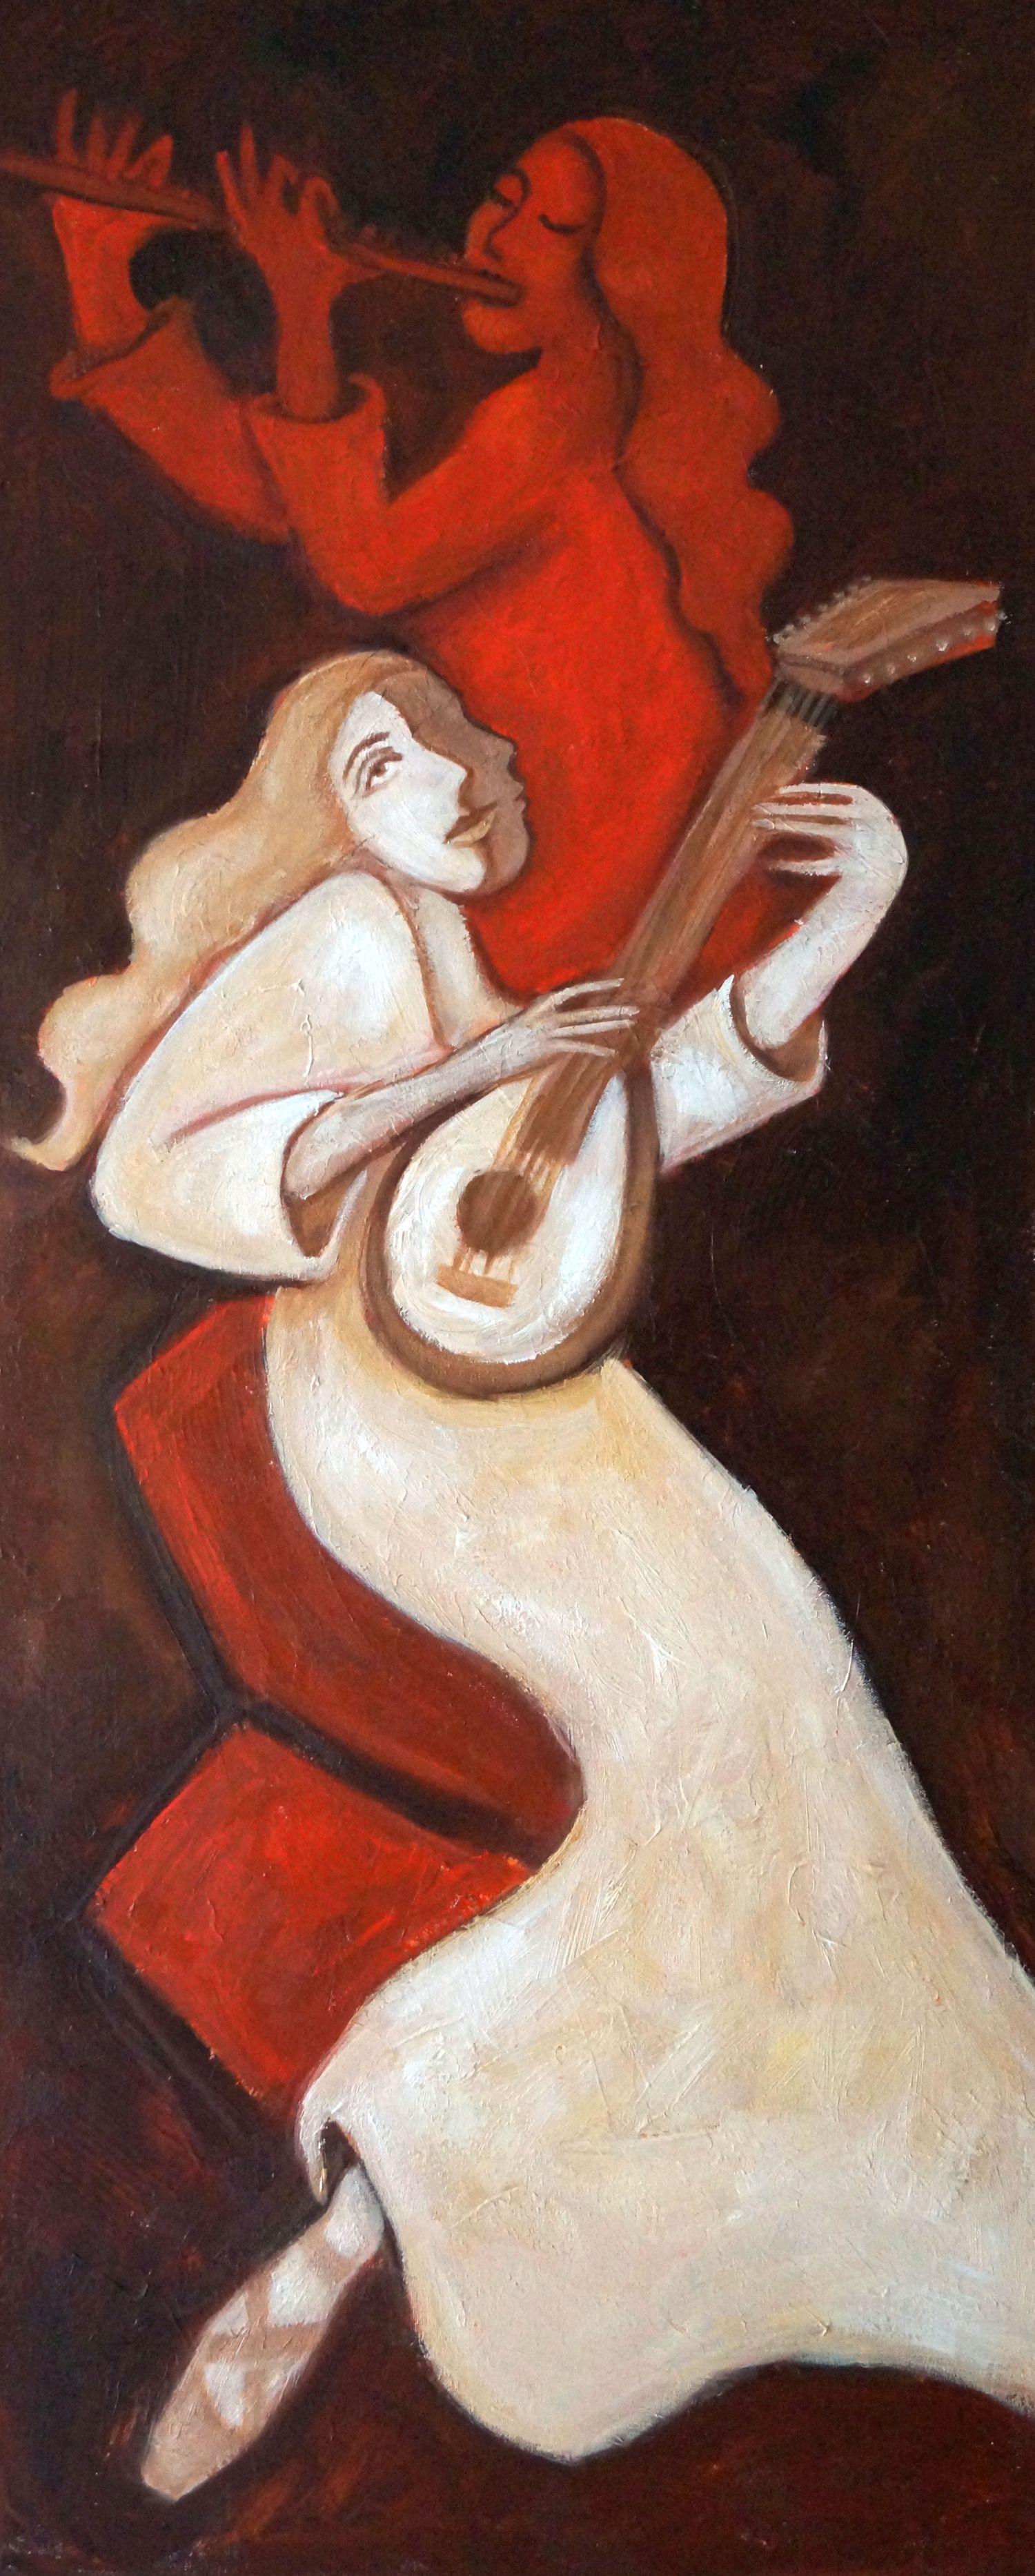 This is from my lute series which is ongoing because I love to paint them so much. I become more centered and serene while painting them. Thatâ€™s what they exude, a tranquility and peace. The lute player is the palest yellow white and the flautist